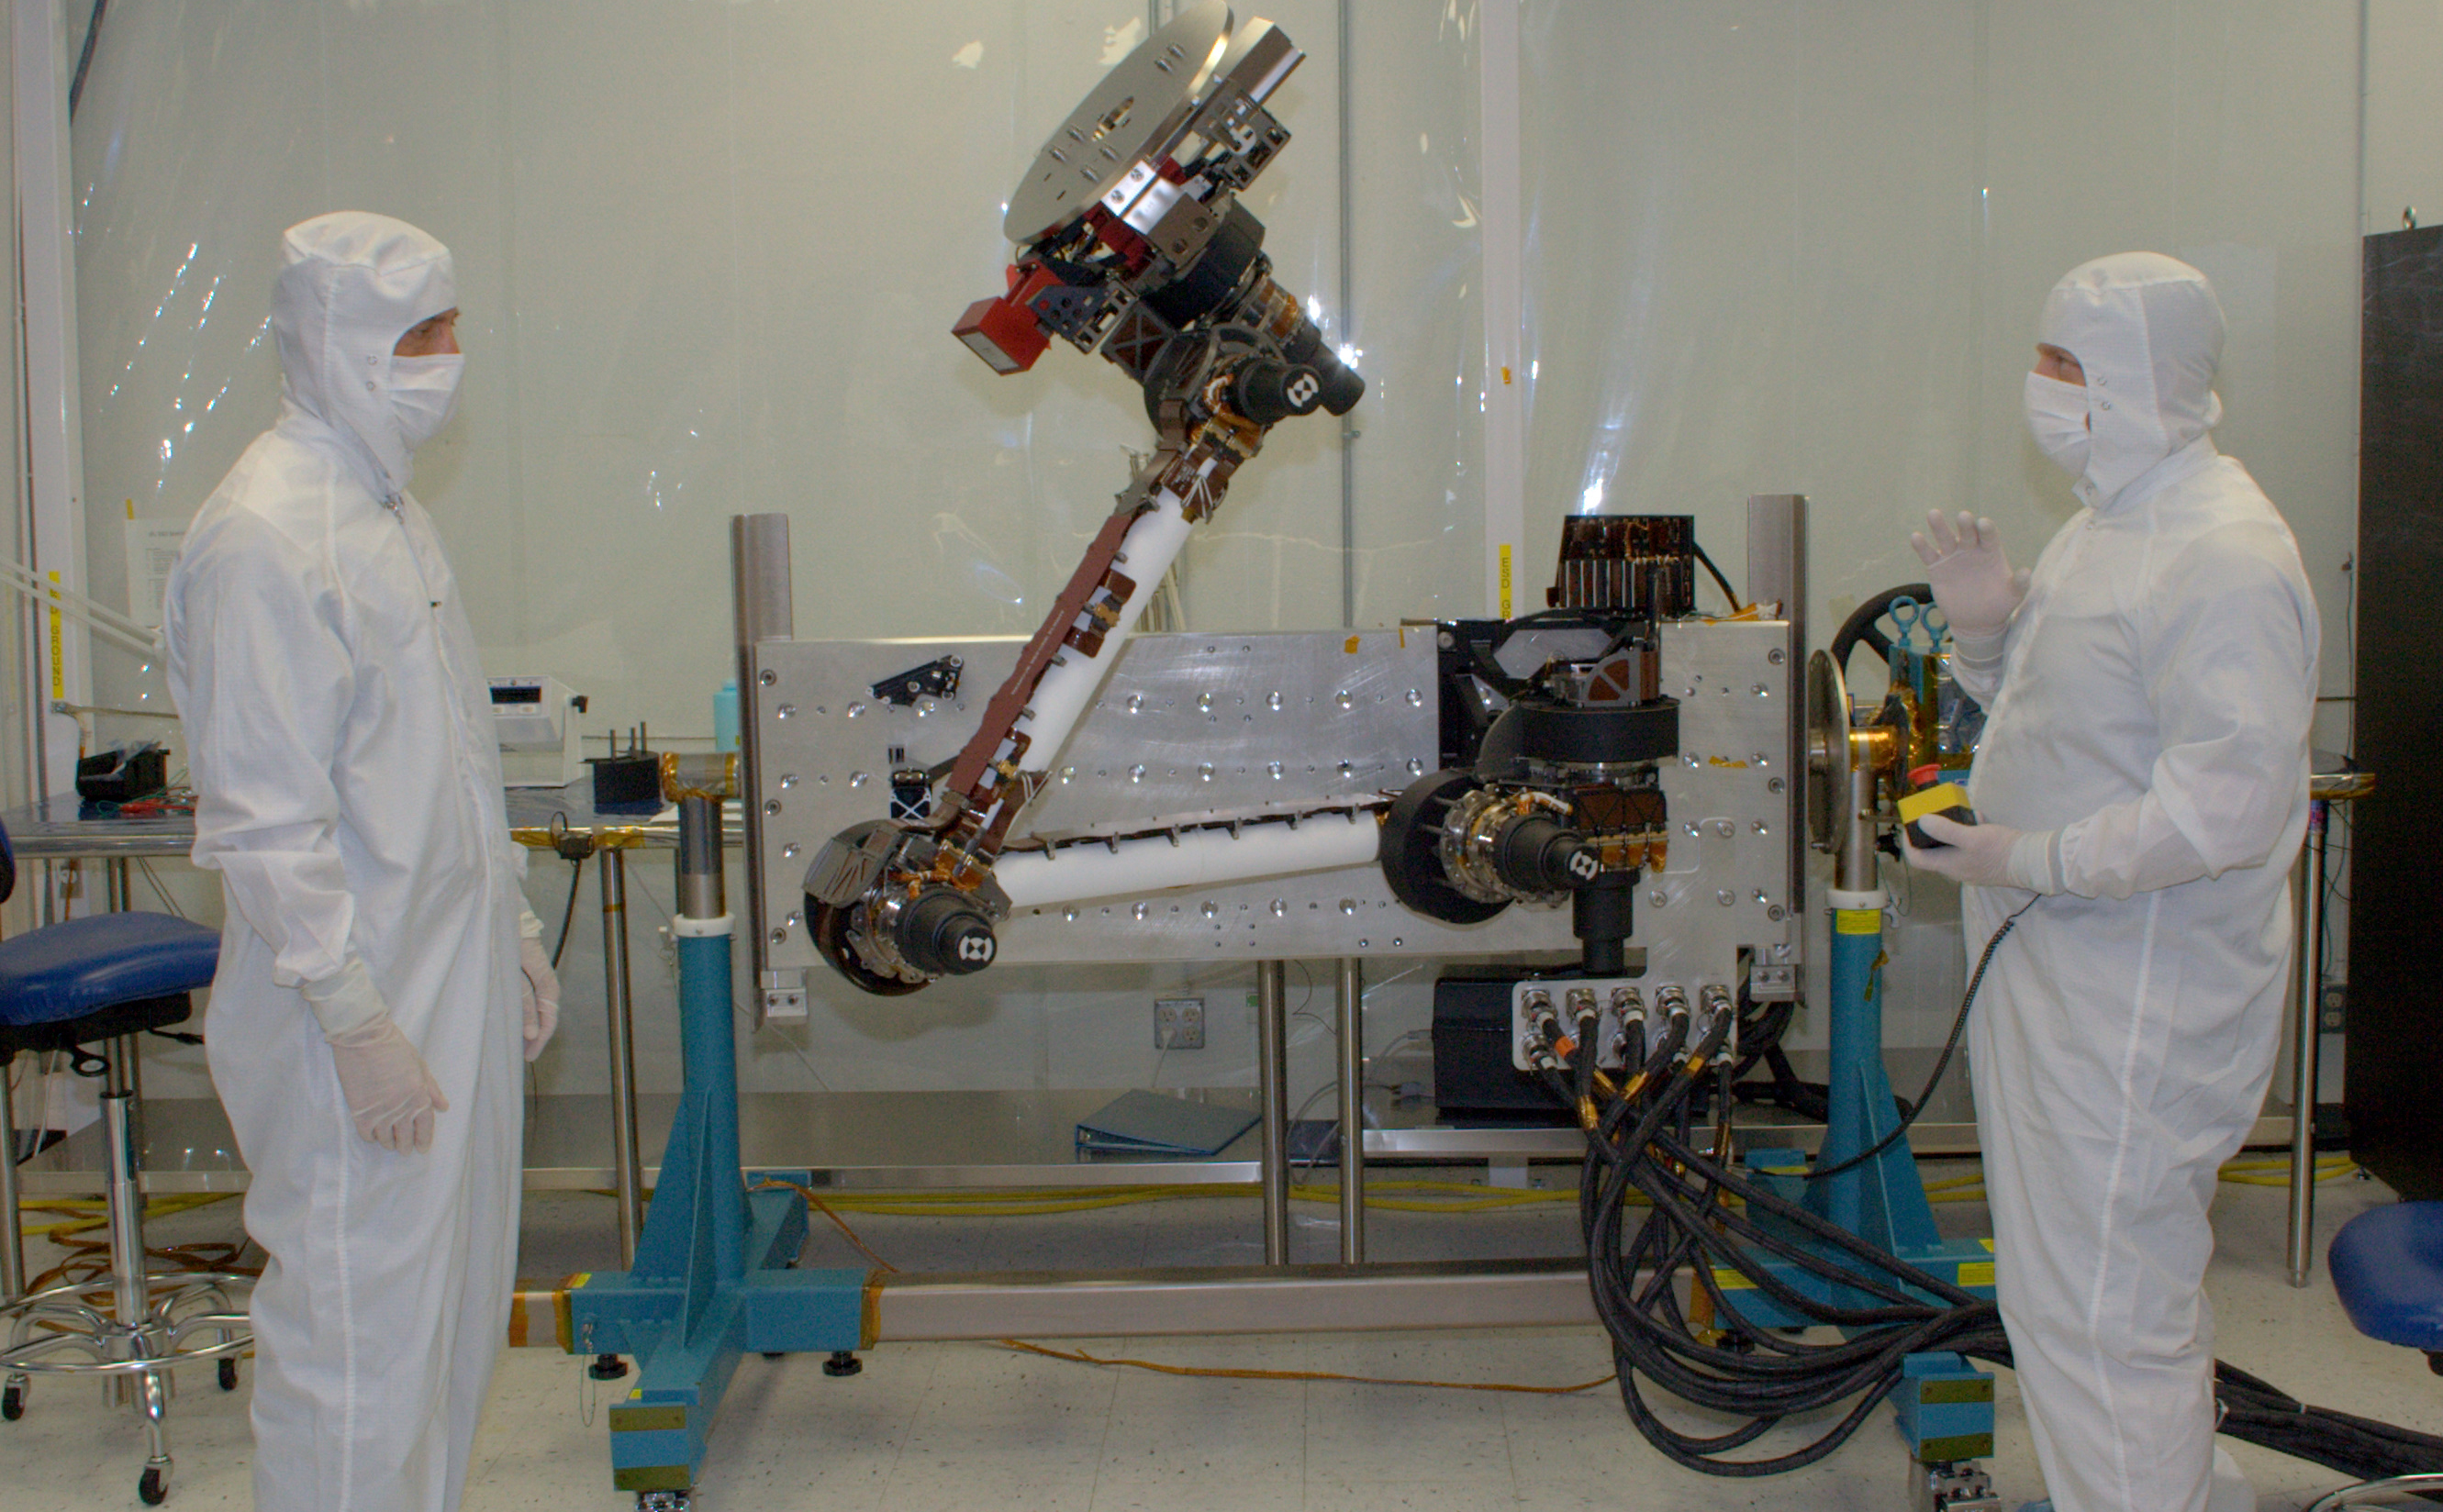 In this photo, two engineers from NASA Jet Propulsion Laboratory and Alliance Spacesystems are standing in a white room on either side of the Mars Science Laboratory rover's robotic arm.  They are dressed in white 'bunny suits,' and are covered from head to toe wearing white face masks to protect the equipment.  The arm is bent at the 'elbow' and raised high in the air about two feet higher than the engineer on the left.  The engineer on the right holds a control box that maneuvers the arm for testing.